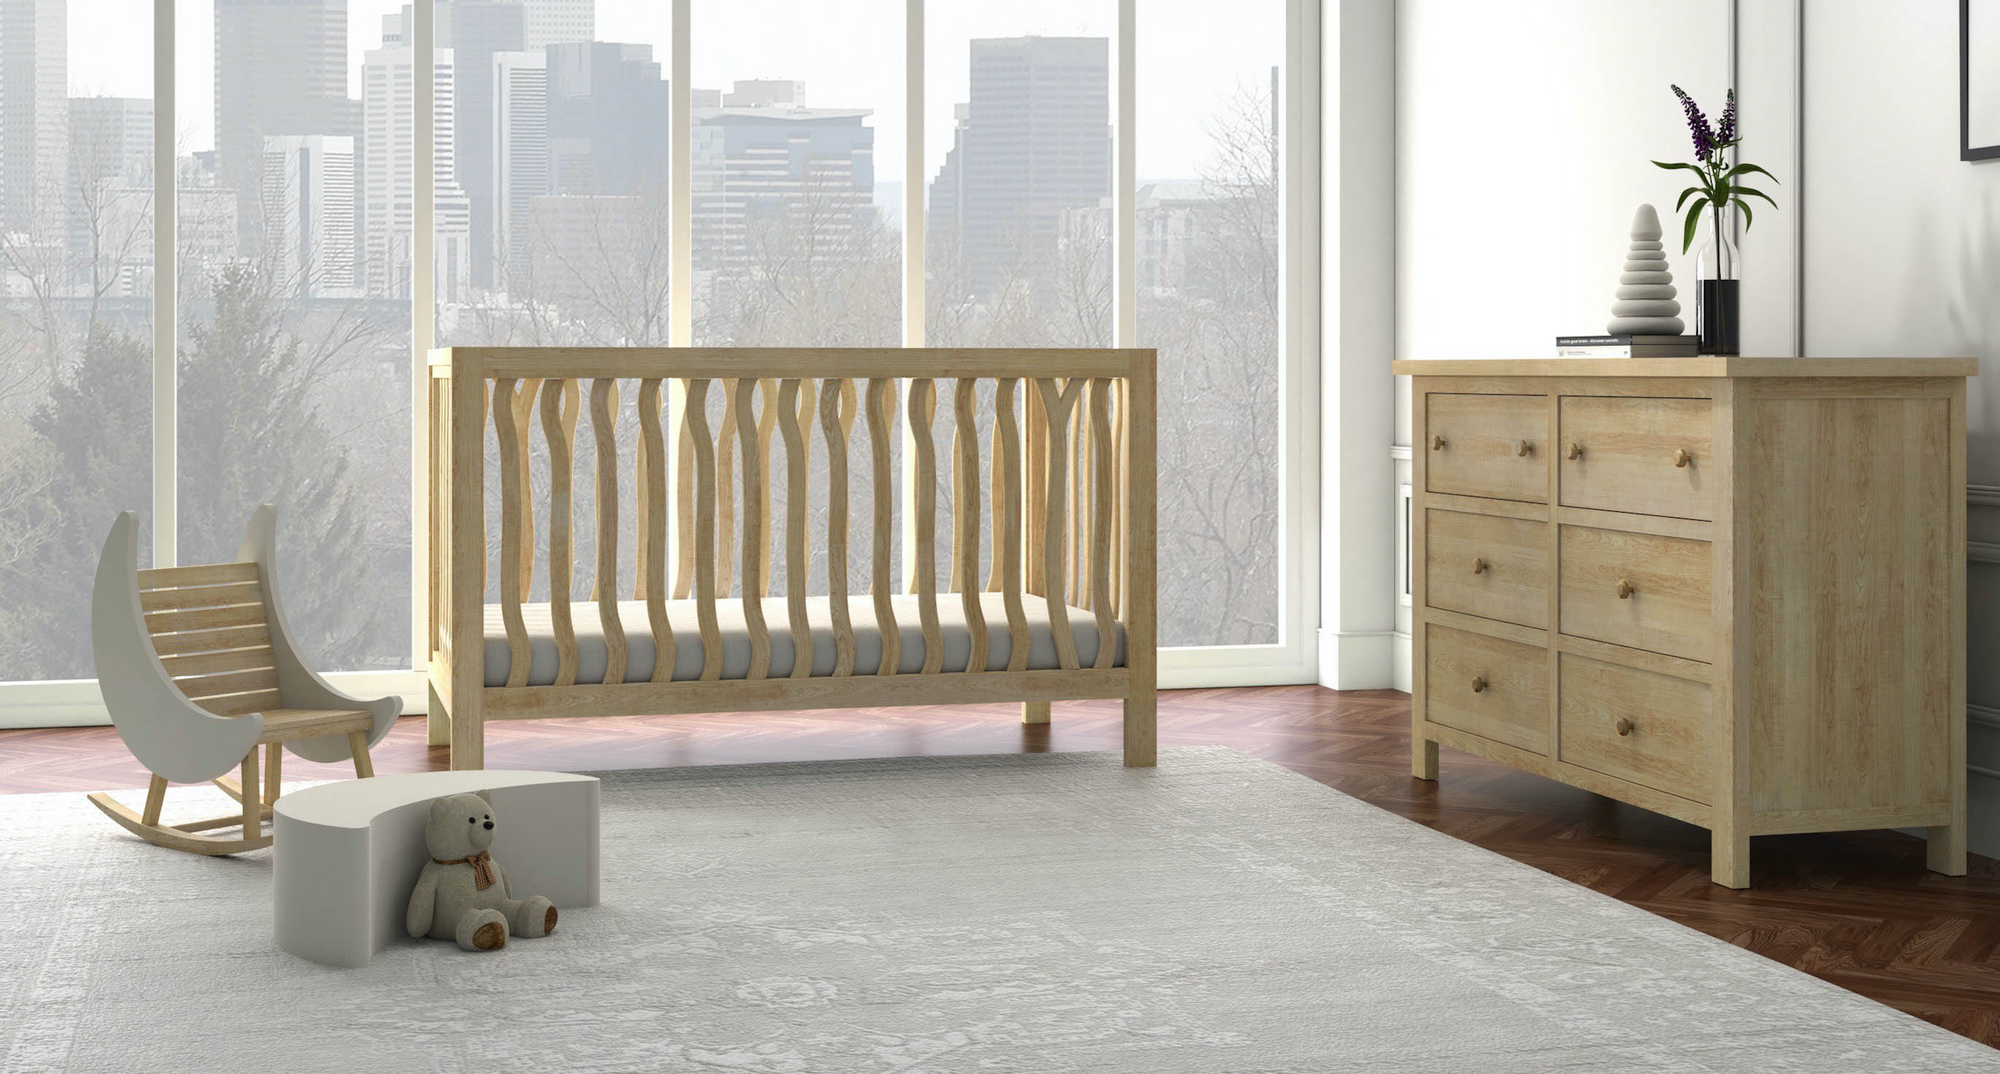 Incredible Deals on Cribs, Dressers and Baby Furniture